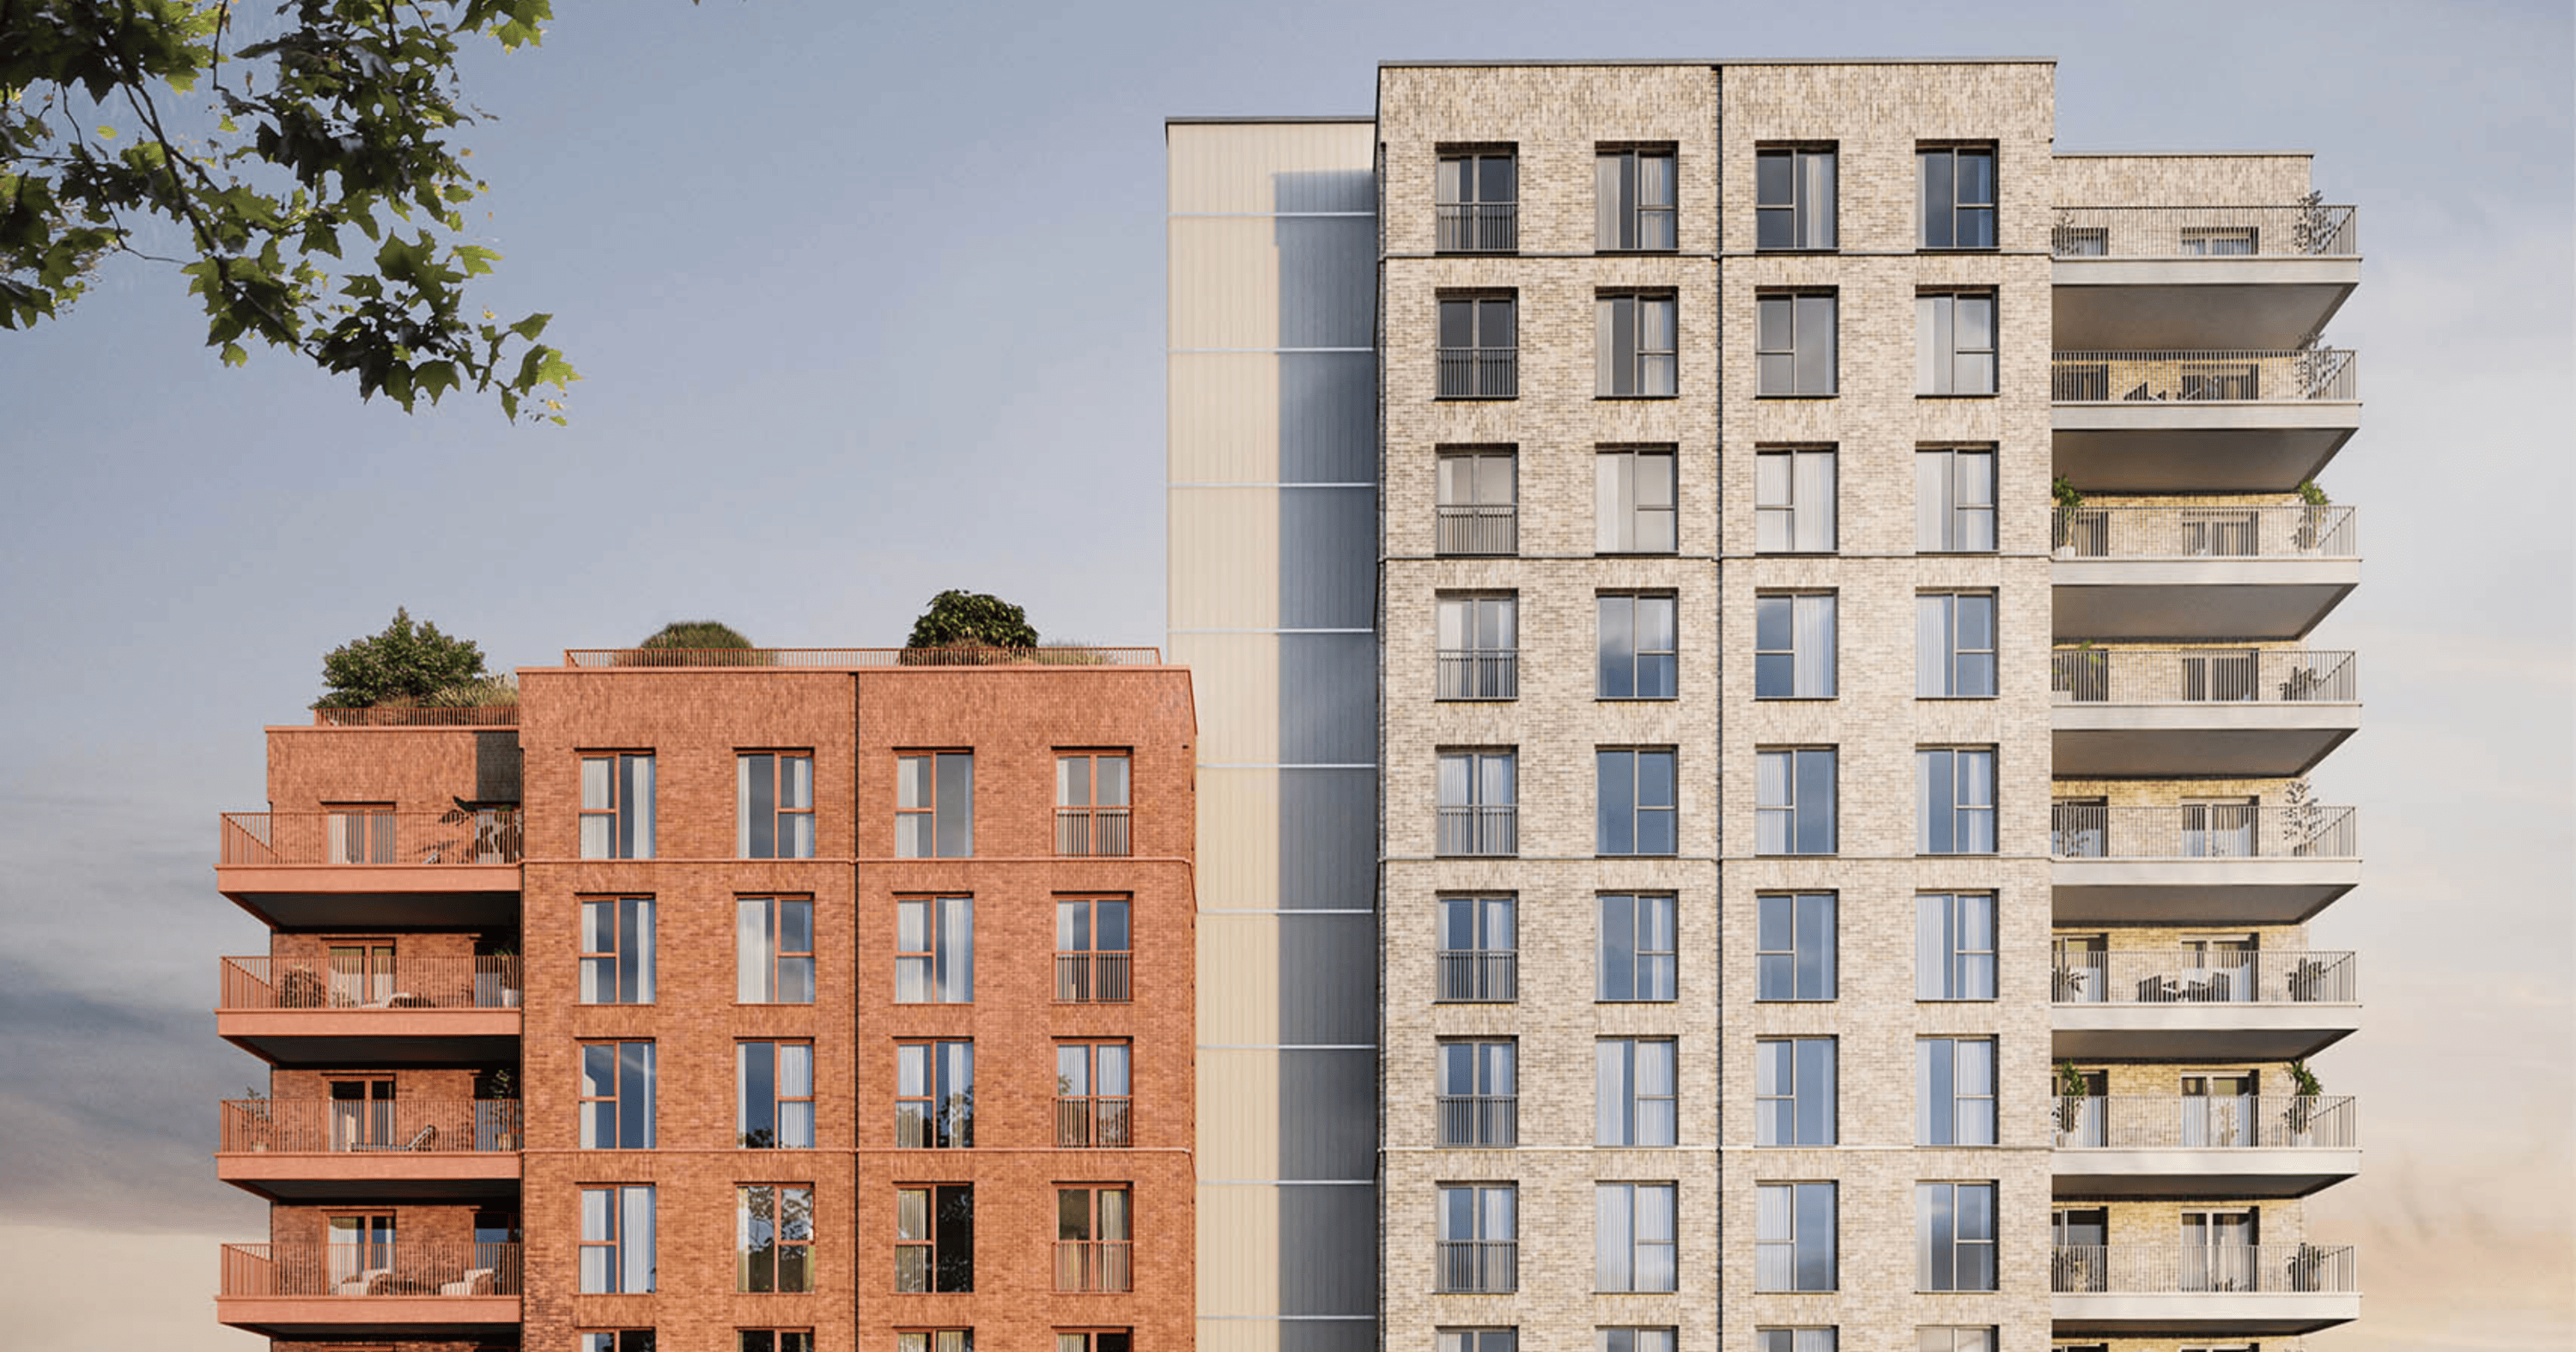 An external image of the buildings at Pocket Livings' Osier Way E10 development - availble to purchase through Discount Full Ownership on Share to Buy!